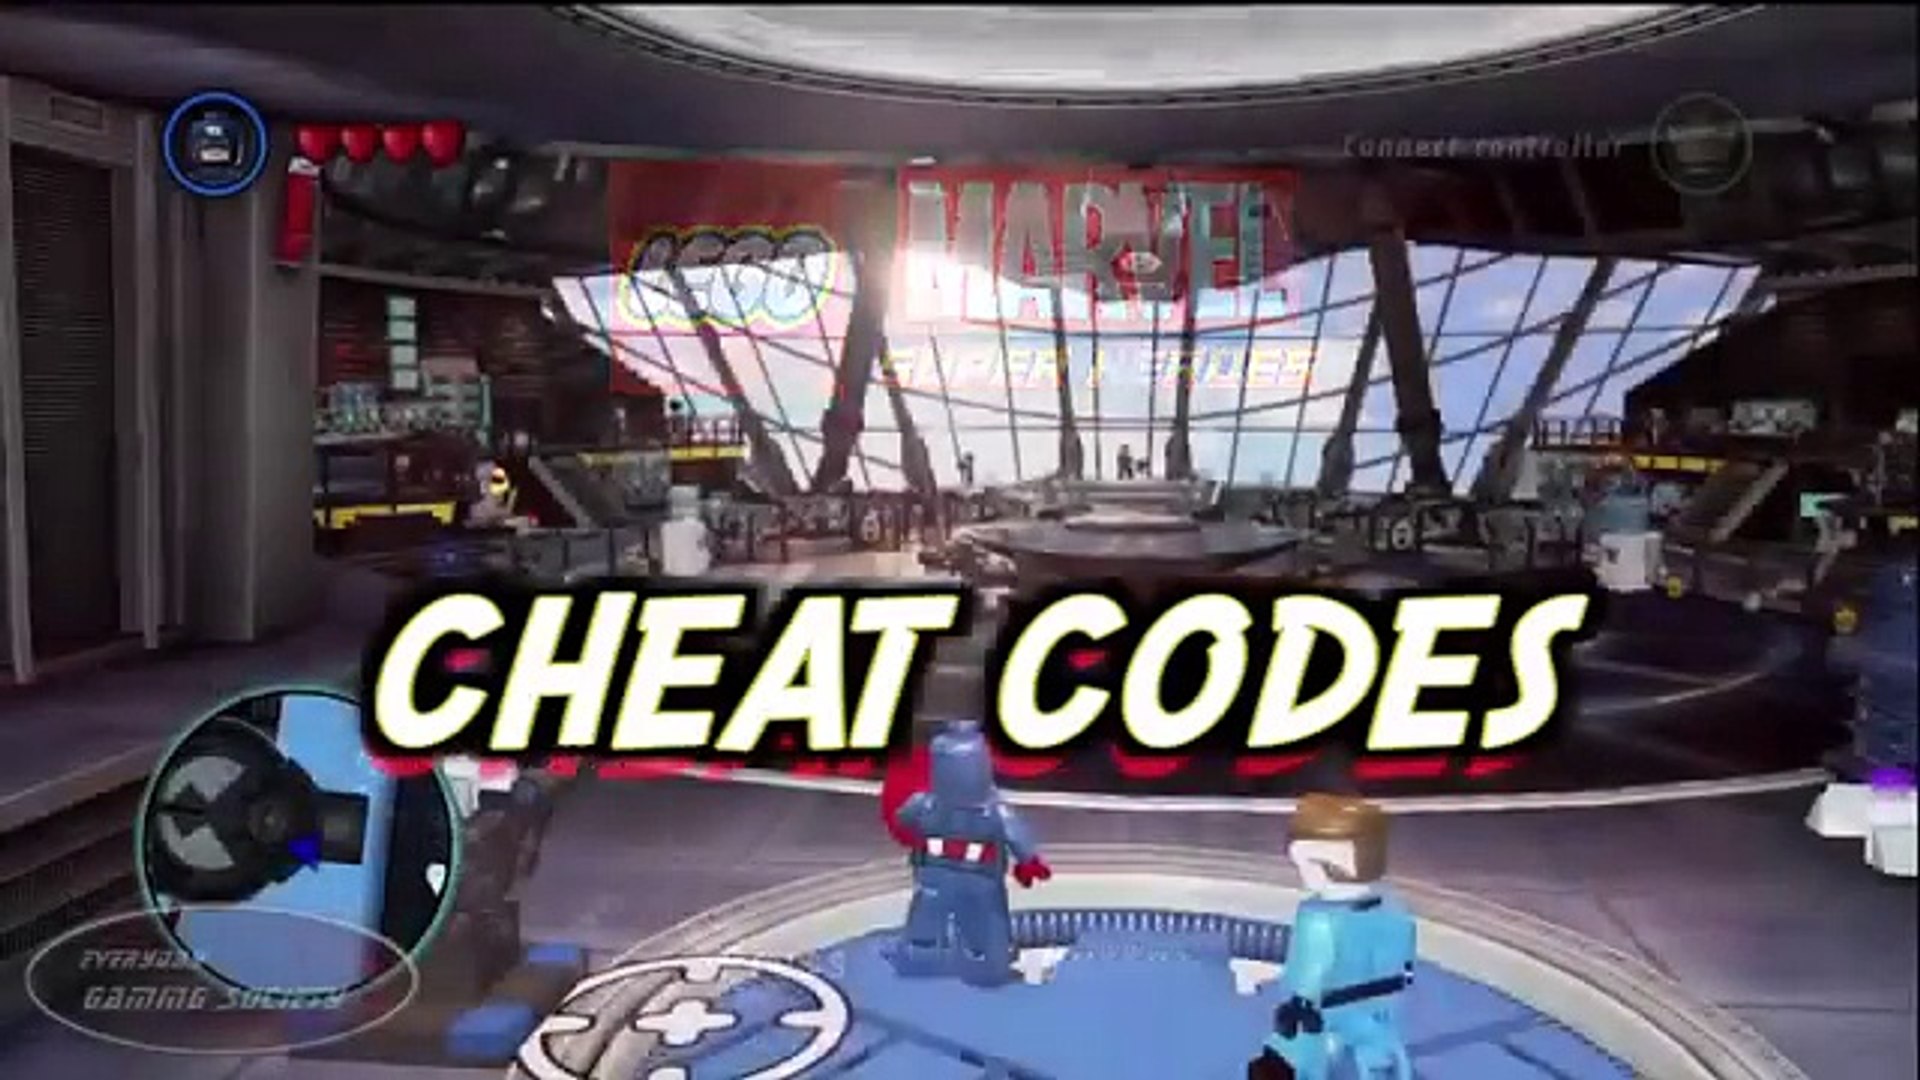 LEGO Marvel Super Heroes - Cheat codes - video Dailymotion